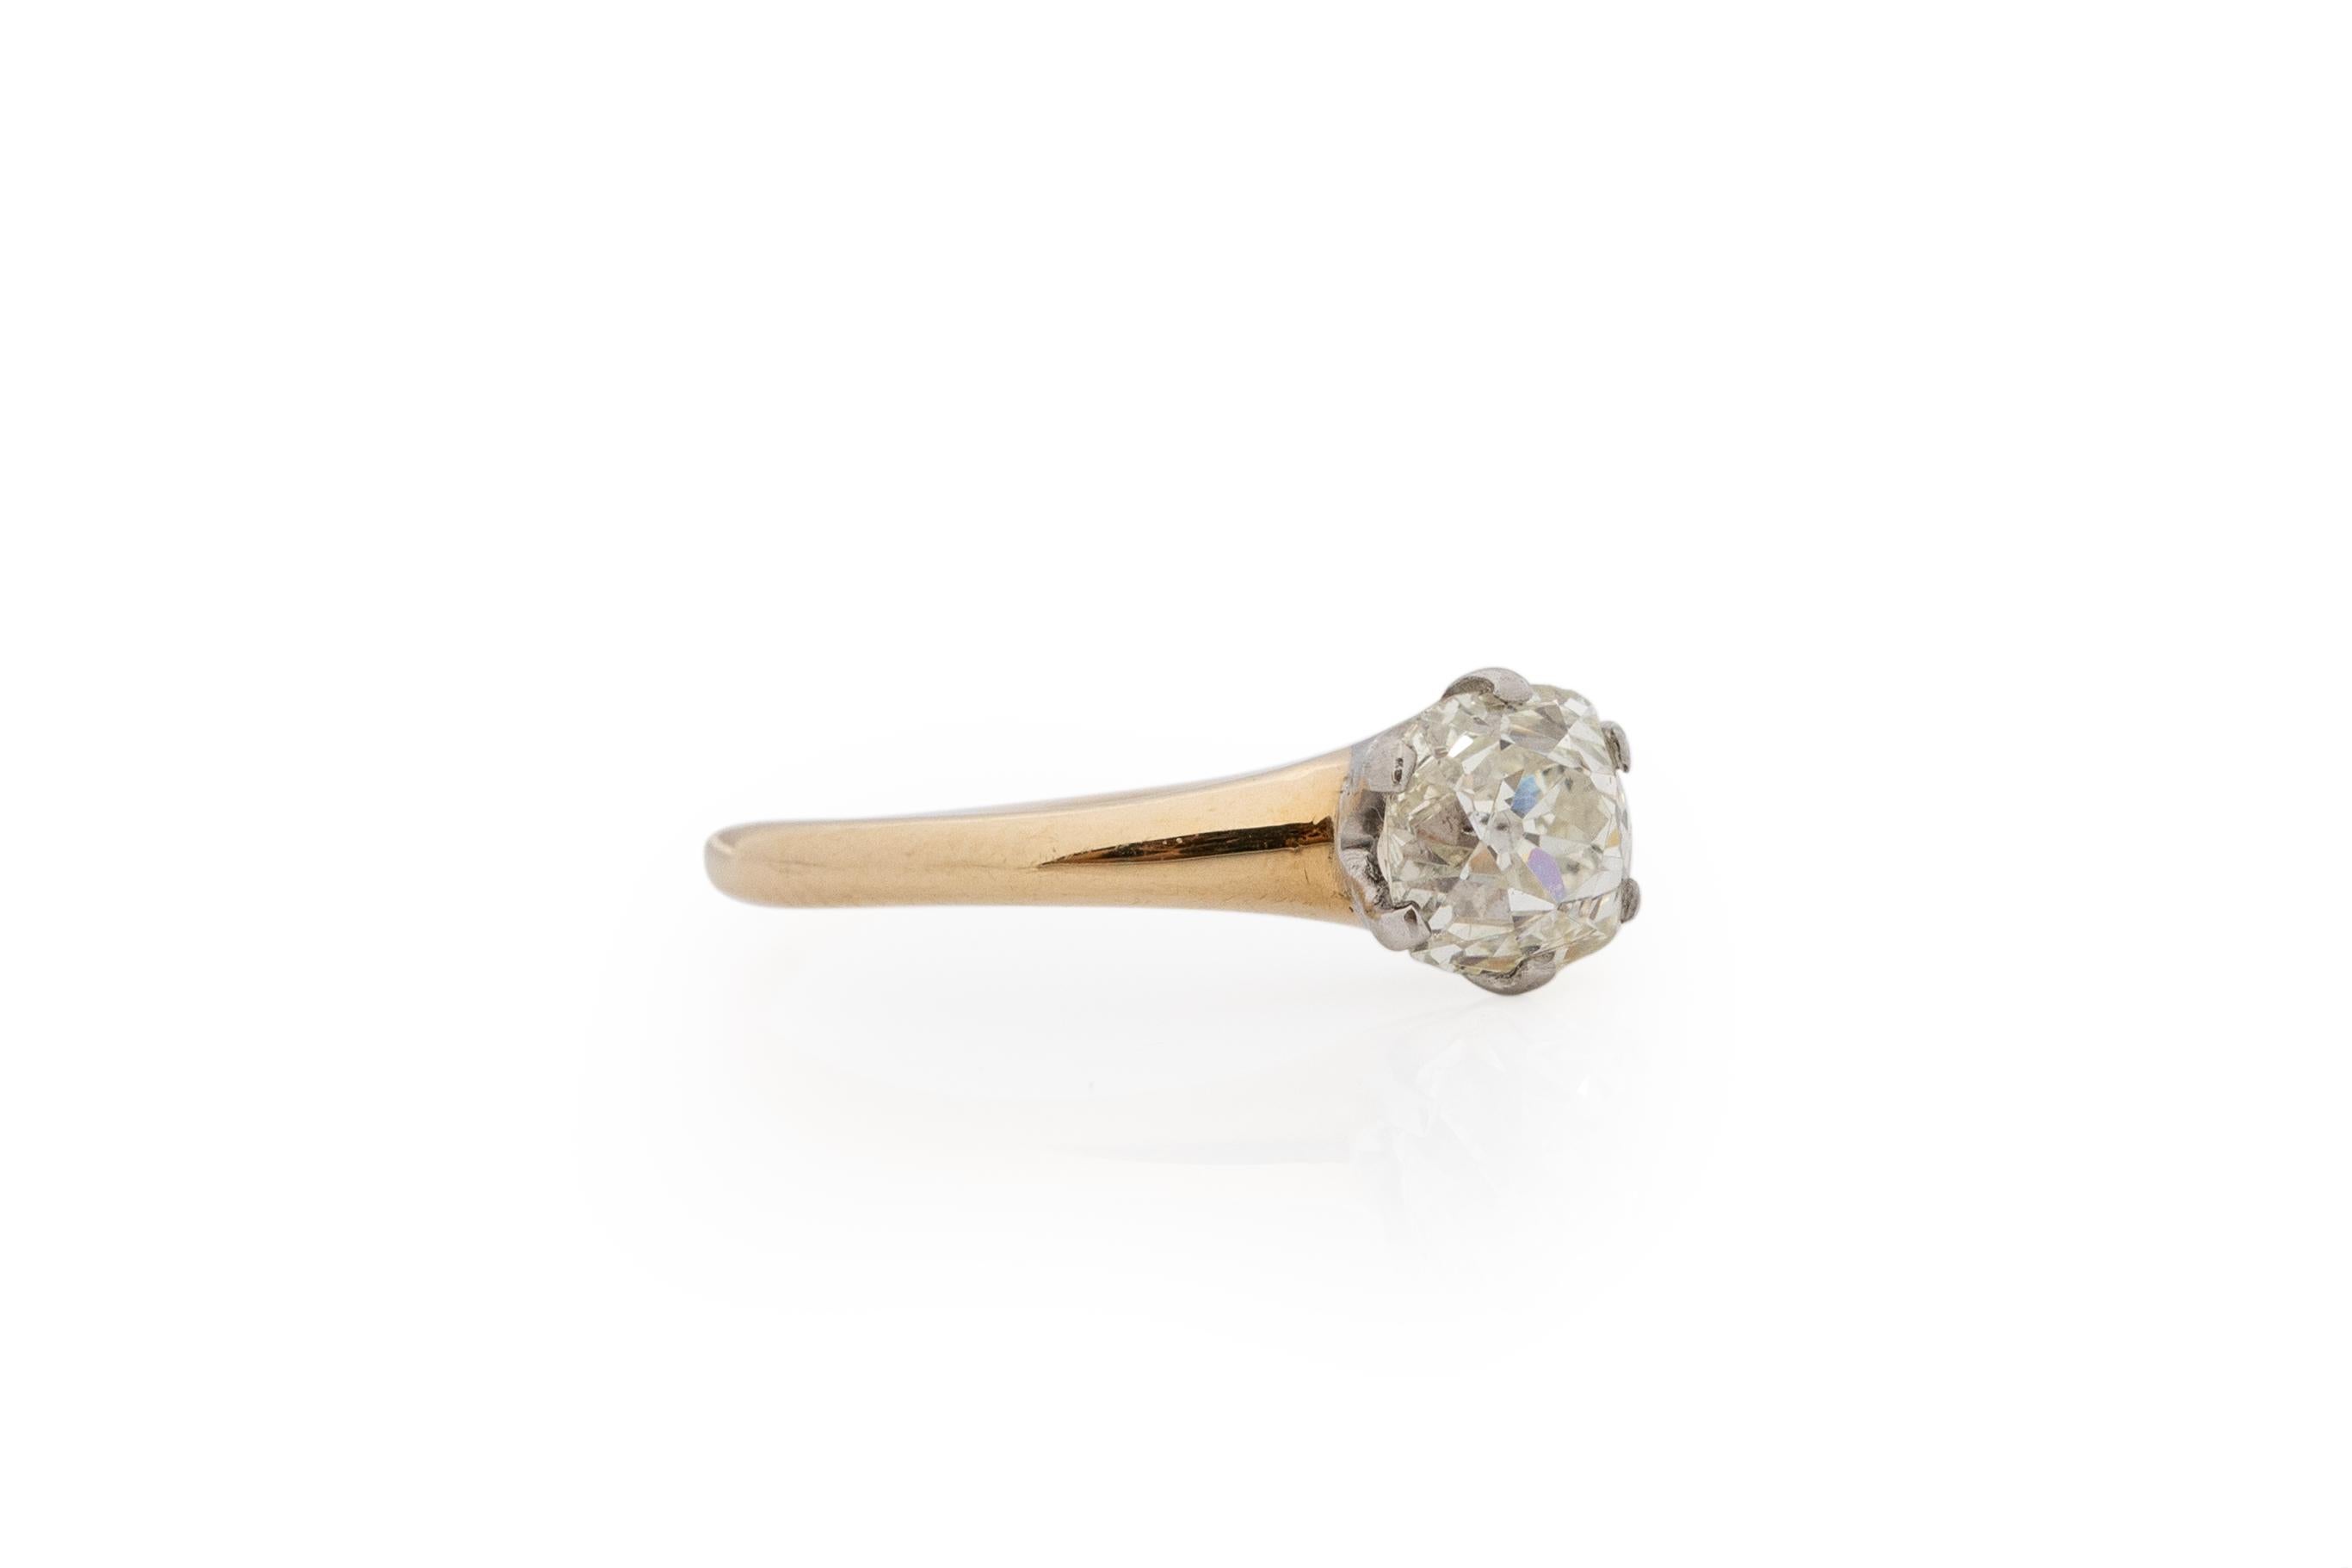 Ring Size: 6.5
Metal Type: 14K Yellow Gold & Platinum Head [Hallmarked, and Tested]
Weight: 2.5 grams
Maker: Gorham

Center Diamond Details:
Weight: 1.40ct
Cut: Old Mine Brilliant (Antique Cushion)
Color: J/K
Clarity: SI1

Finger to Top of Stone